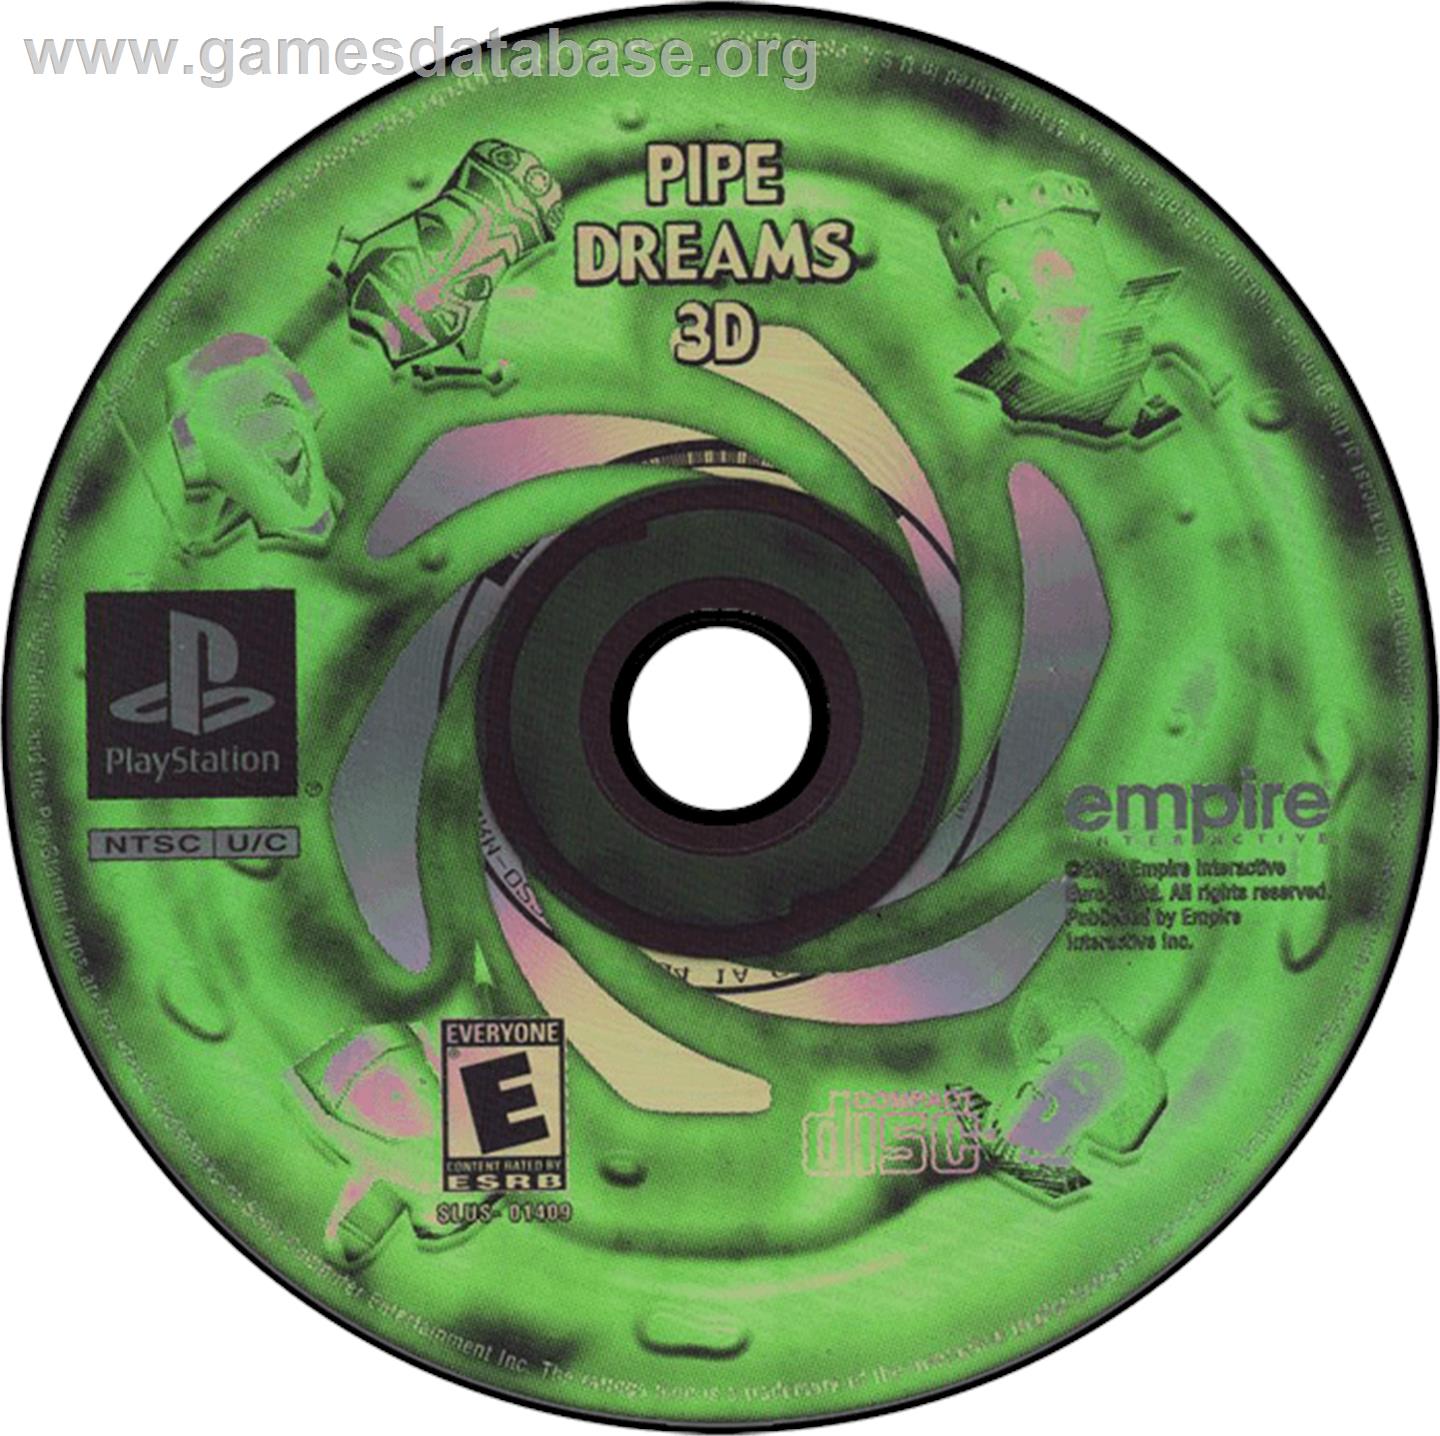 Pipe Dreams 3D - Sony Playstation - Artwork - Disc